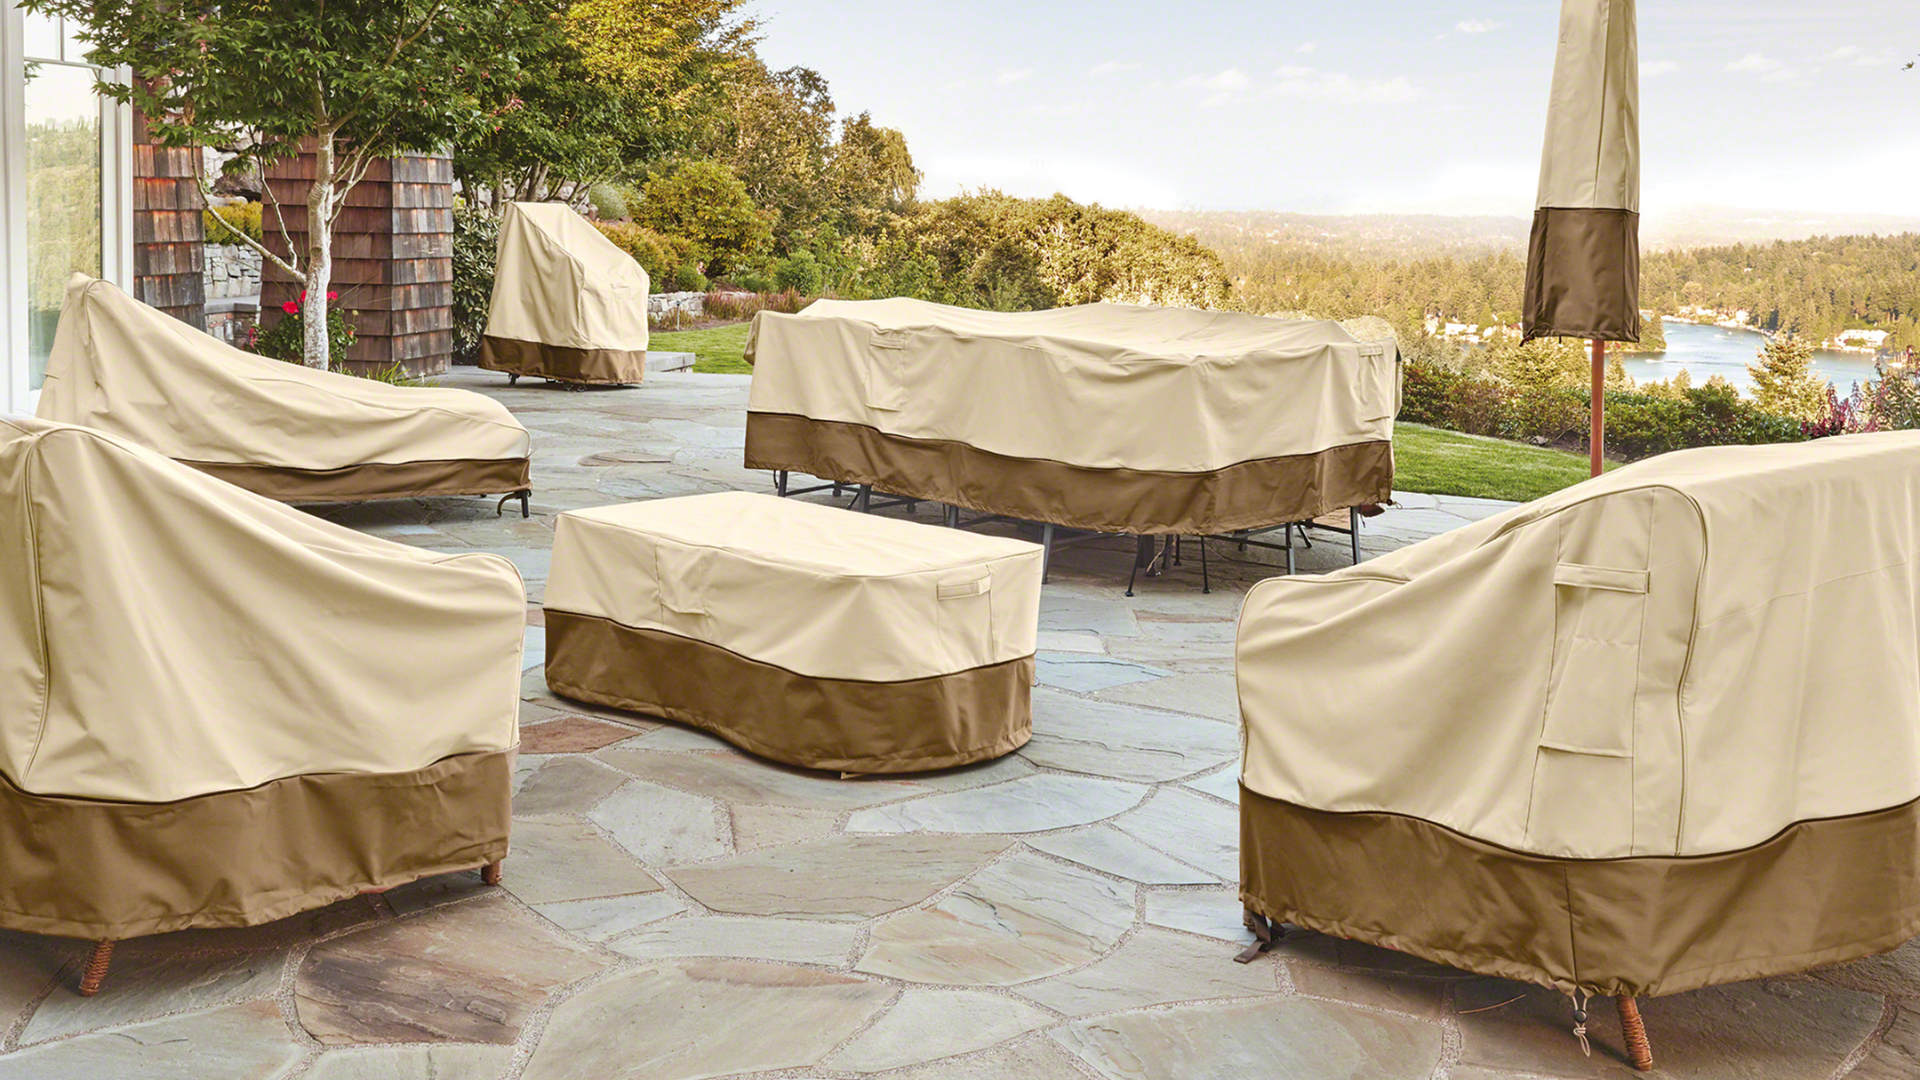 Heavy Duty and Waterproof Outdoor Lawn Patio Furniture Covers 2 Pack - Medium, Beige & Brown Vailge Patio Chair Covers Lounge Deep Seat Cover 